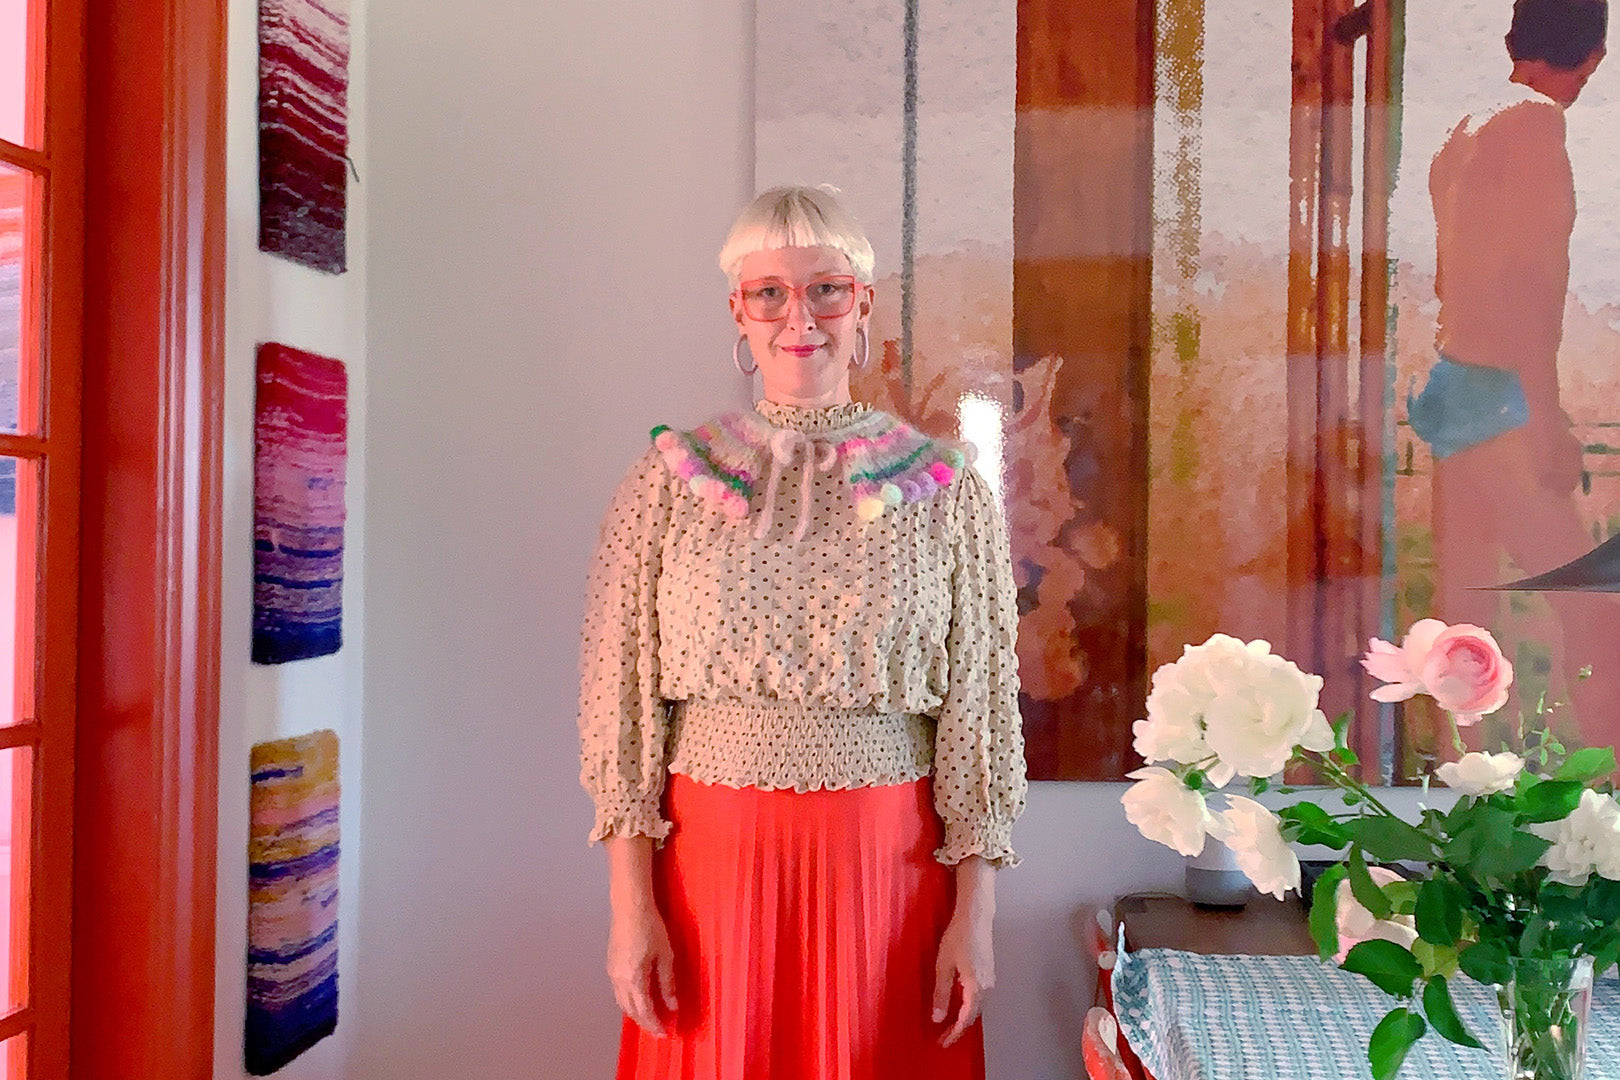 Artist Sofie wearing pink-fringed knitwear and glasses, smiles beside a wall with vibrant textile art pieces, reflecting a bright, inspiring creative studio space.